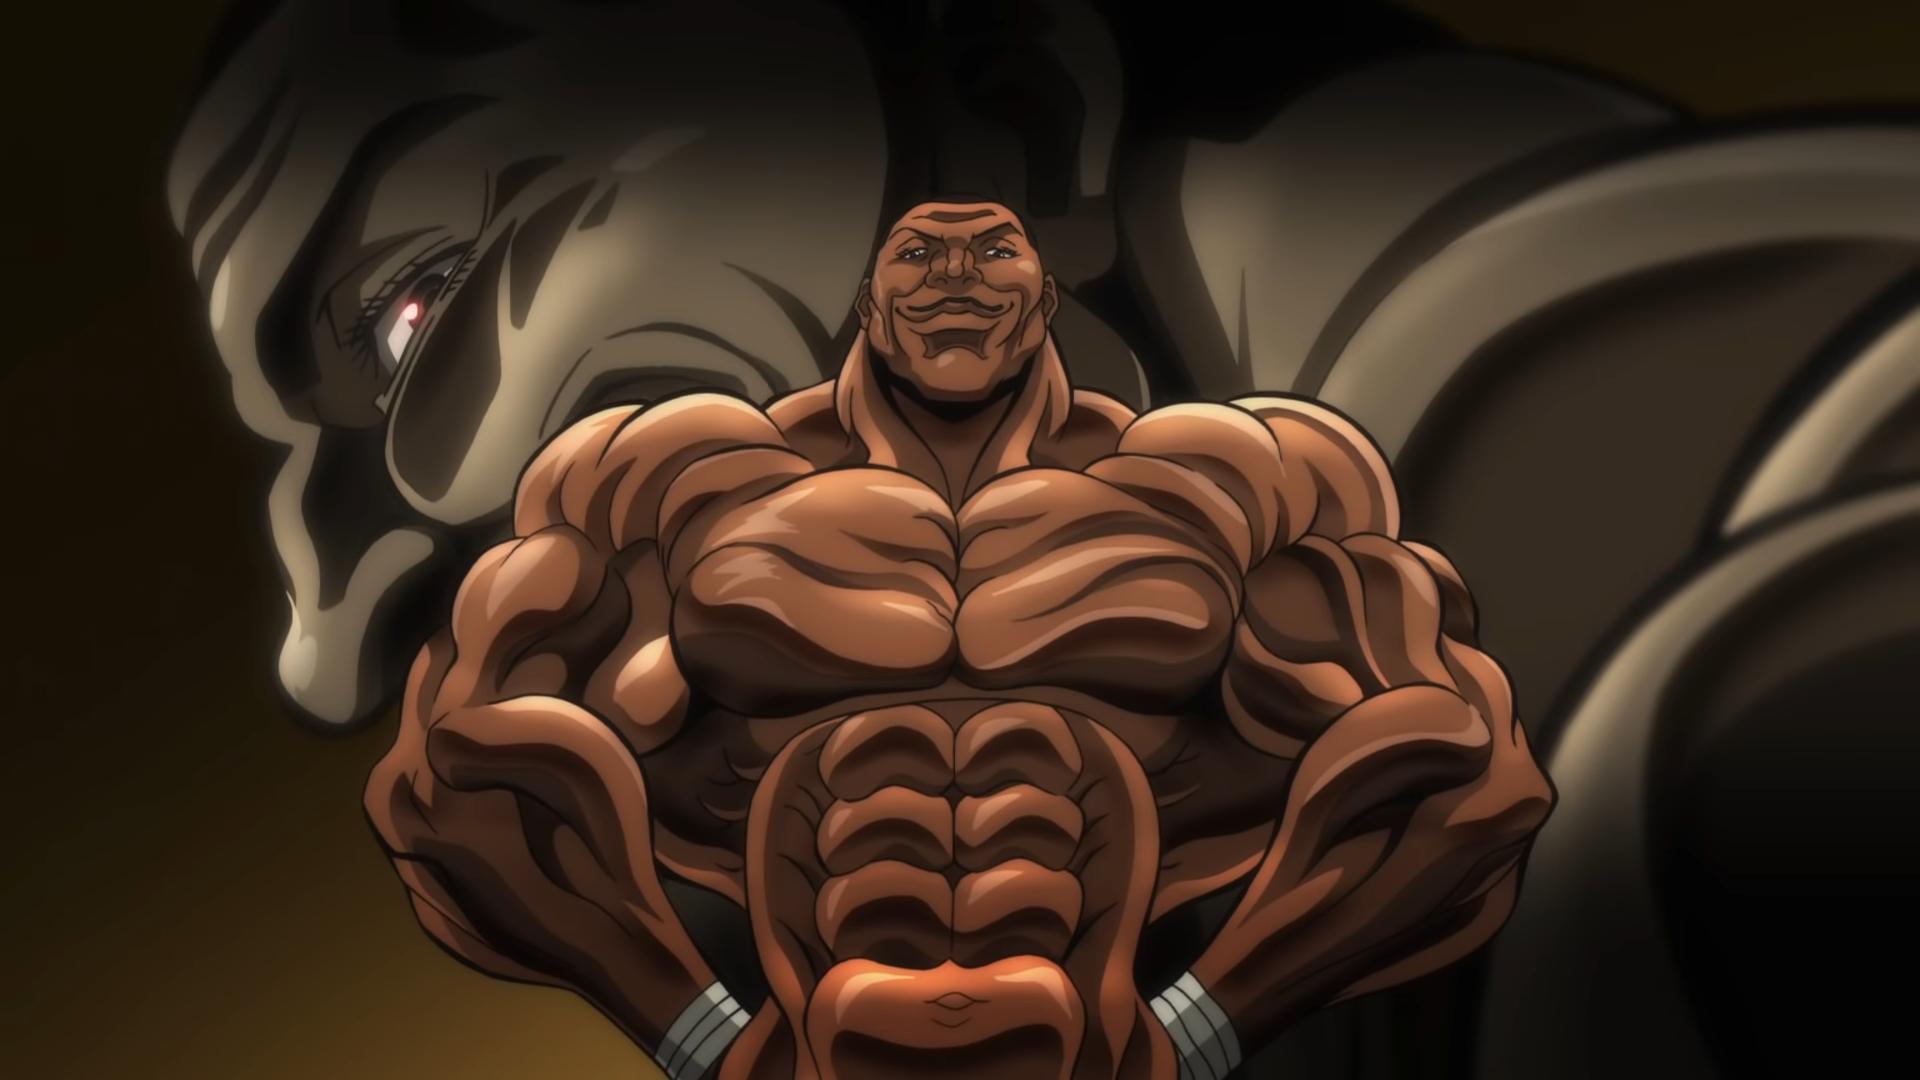 1920 x 1080 · png - Baki (2018) Image - ID: 350028 - Image Abyss